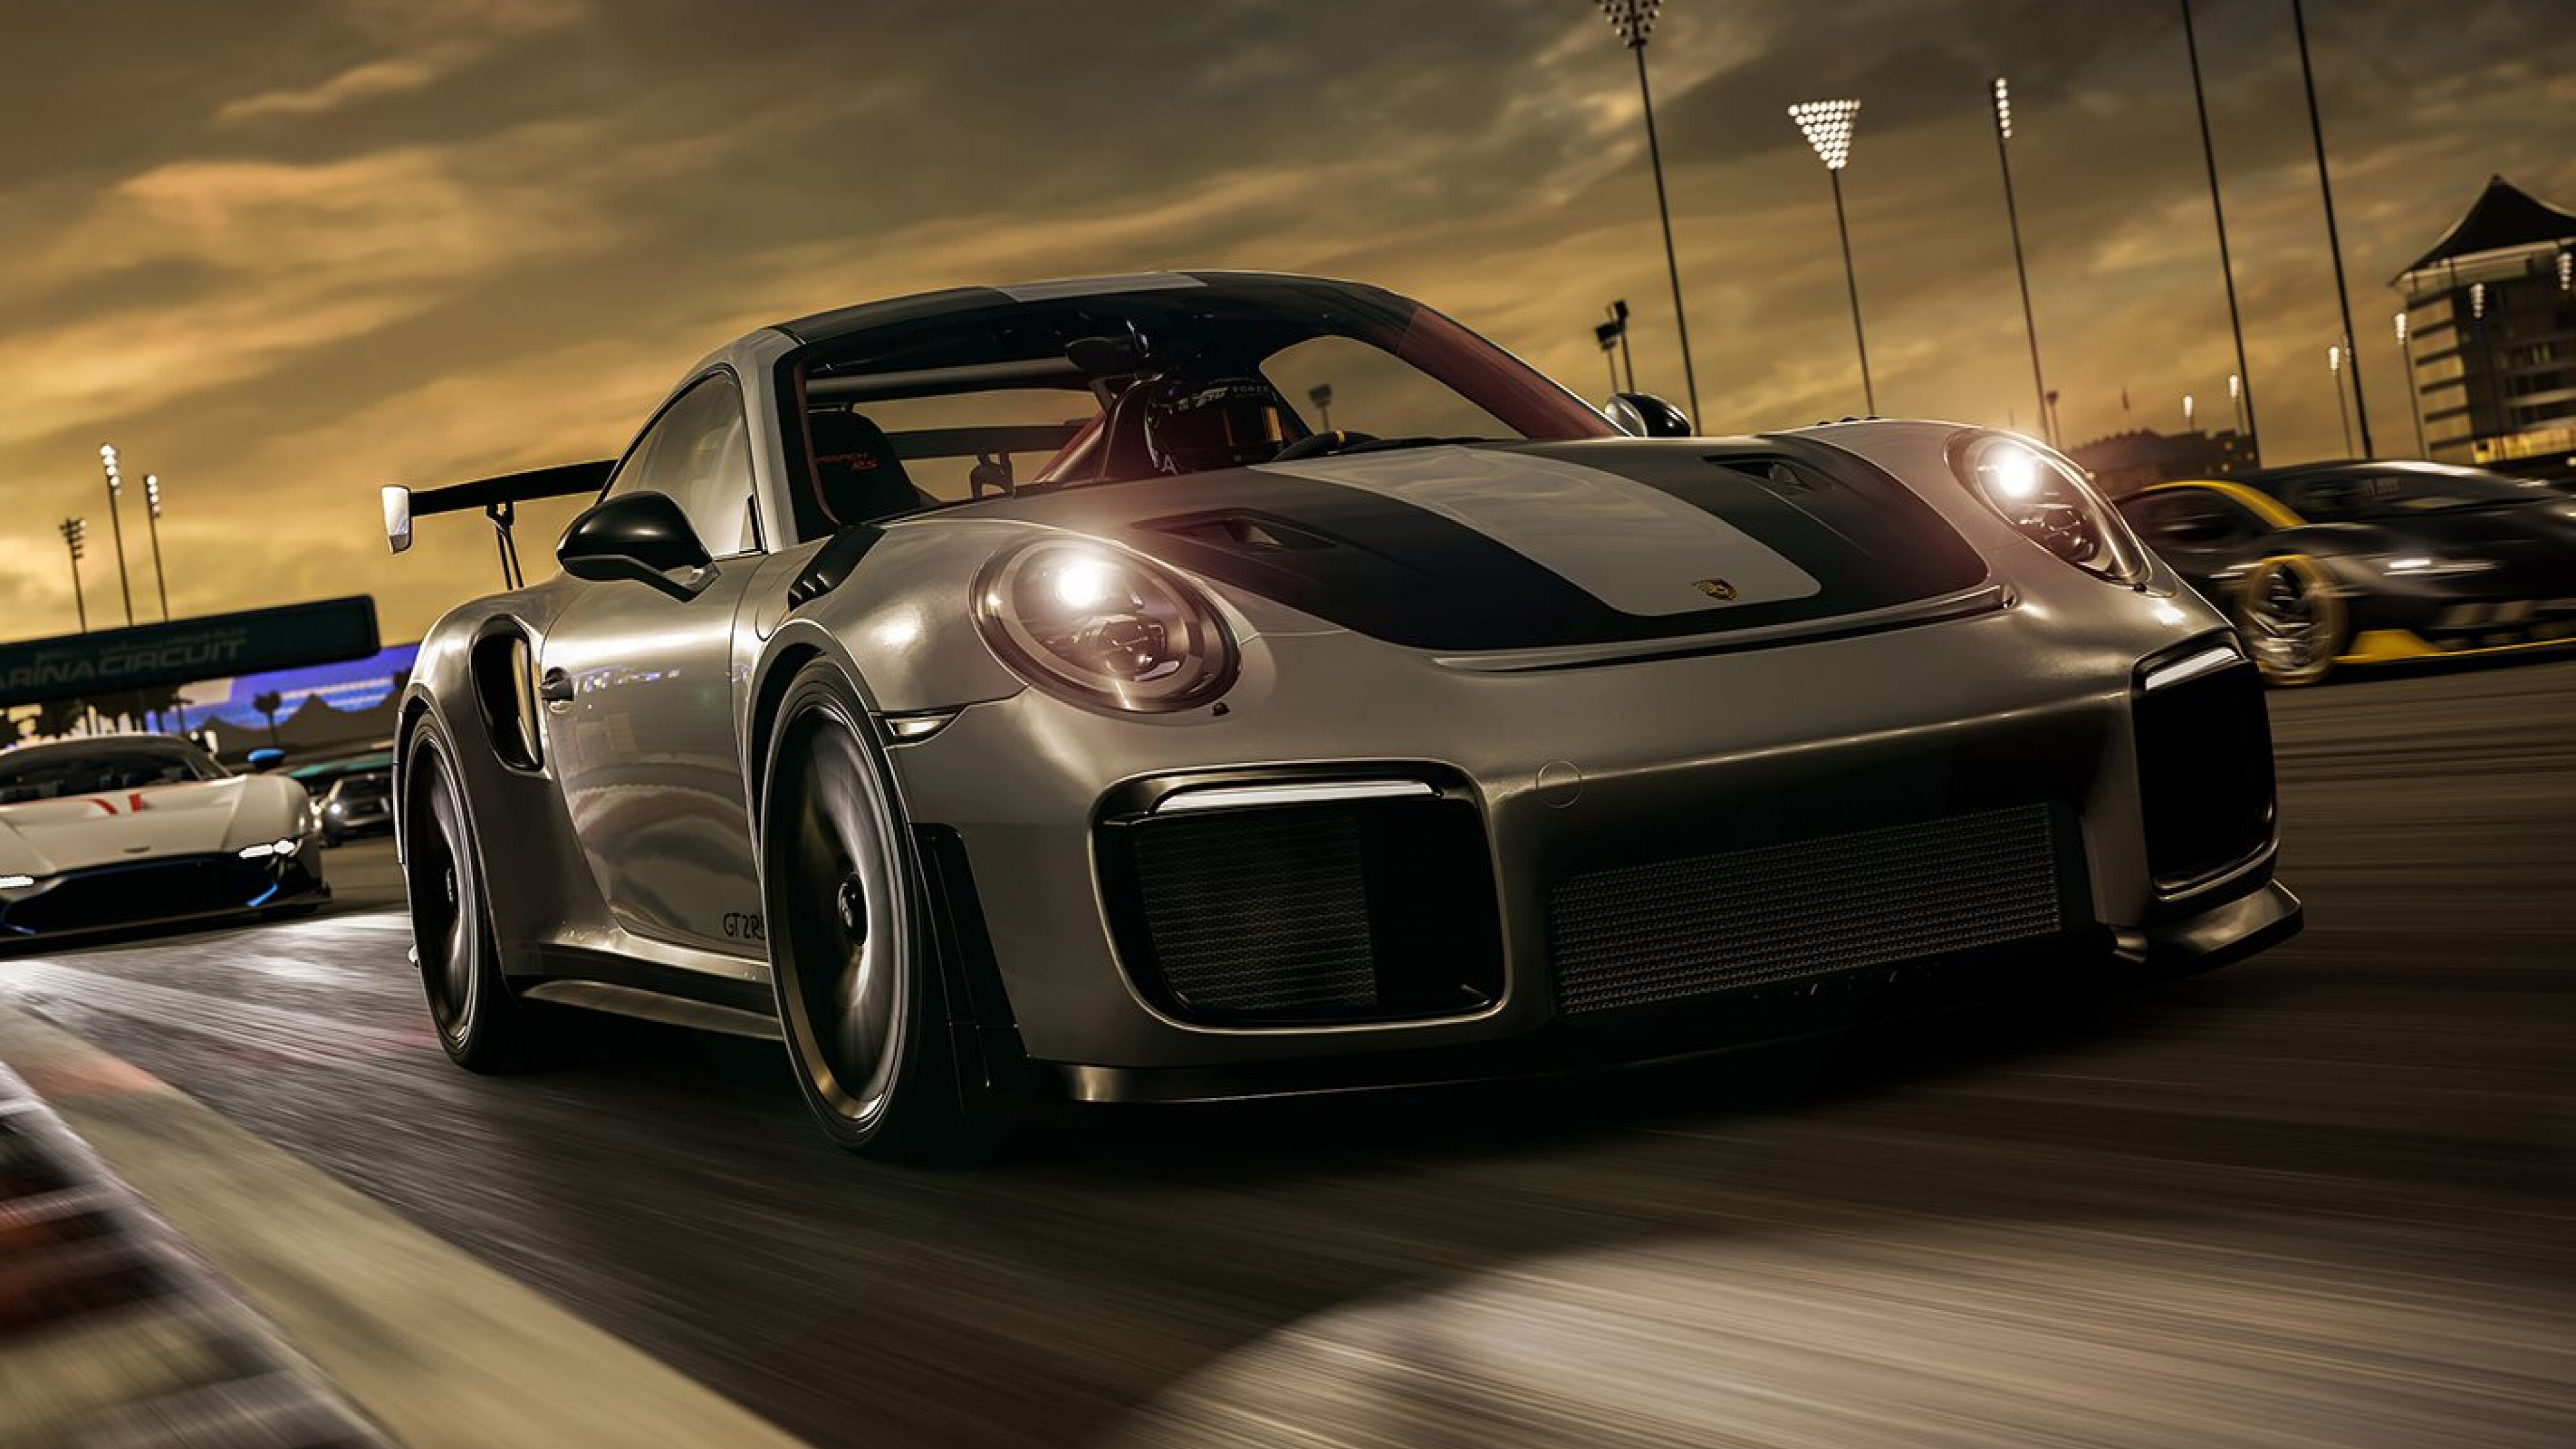 Porsche Comes to Forza Motorsport 4 with 30-Car Downloadable Expansion